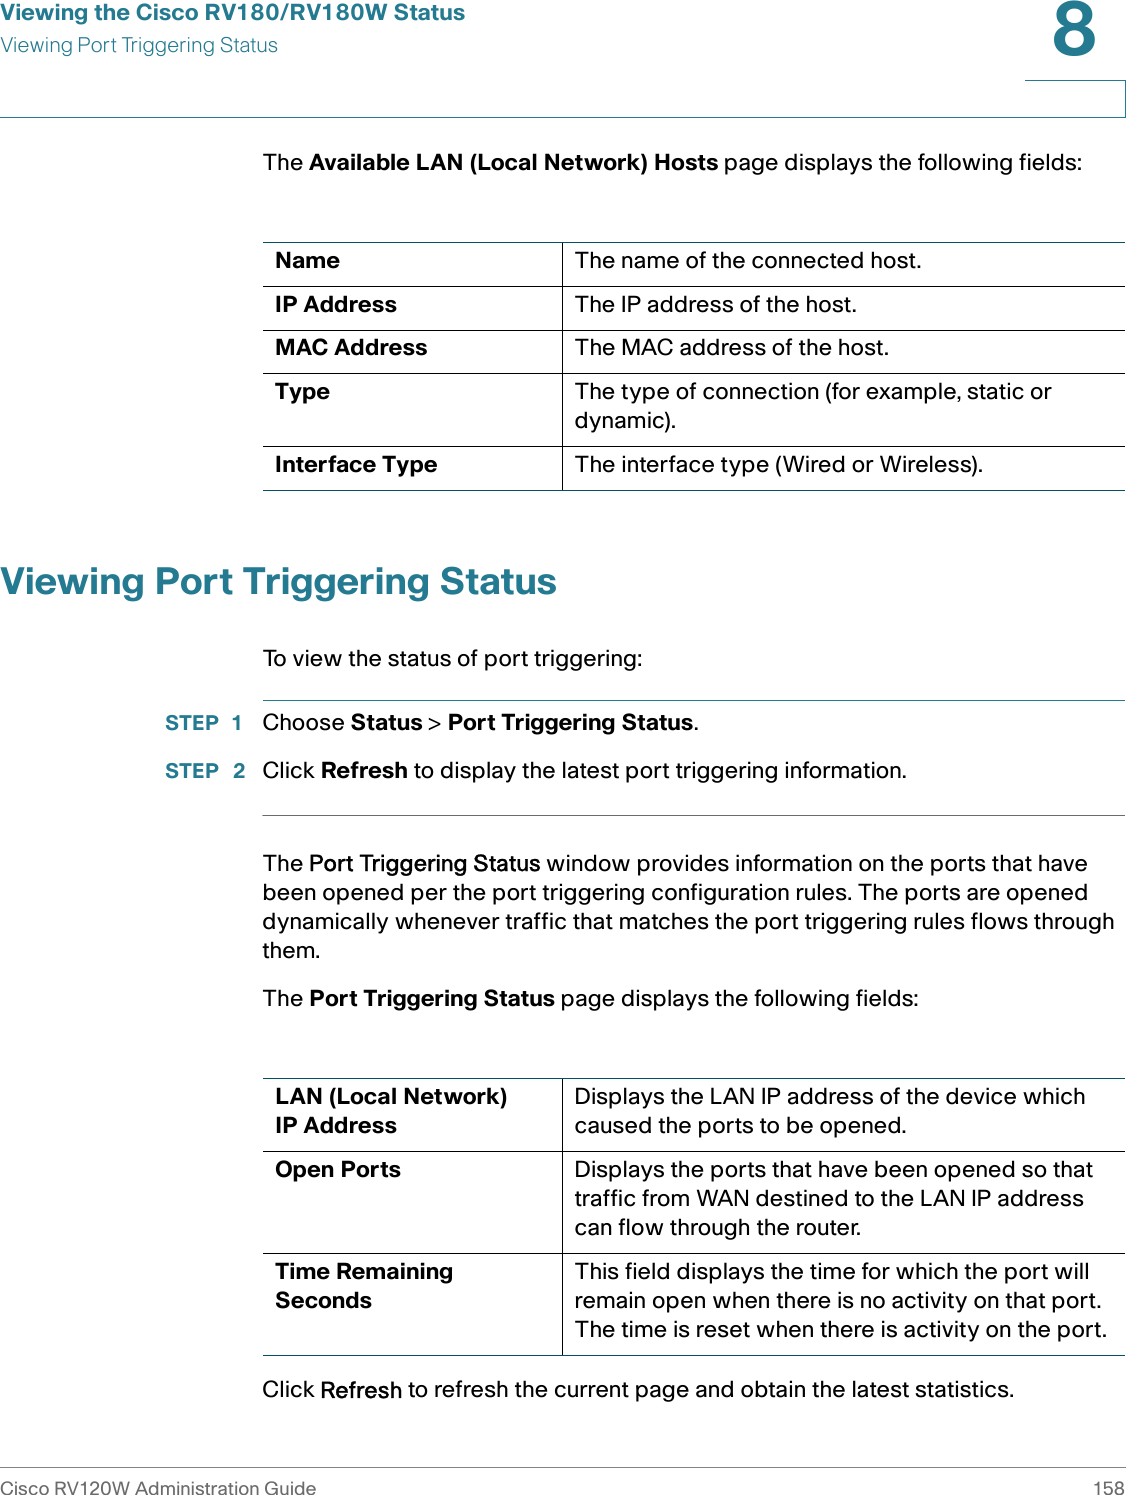 Viewing the Cisco RV180/RV180W StatusViewing Port Triggering StatusCisco RV120W Administration Guide 1588 The Available LAN (Local Network) Hosts page displays the following fields:Viewing Port Triggering StatusTo view the status of port triggering:STEP 1 Choose Status &gt; Port Triggering Status. STEP  2 Click Refresh to display the latest port triggering information.The Port Triggering Status window provides information on the ports that have been opened per the port triggering configuration rules. The ports are opened dynamically whenever traffic that matches the port triggering rules flows through them. The Port Triggering Status page displays the following fields:Click Refresh to refresh the current page and obtain the latest statistics.Name The name of the connected host.IP Address The IP address of the host.MAC Address The MAC address of the host.Type The type of connection (for example, static or dynamic).Interface Type The interface type (Wired or Wireless).LAN (Local Network) IP AddressDisplays the LAN IP address of the device which caused the ports to be opened.Open Ports Displays the ports that have been opened so that traffic from WAN destined to the LAN IP address can flow through the router.Time Remaining SecondsThis field displays the time for which the port will remain open when there is no activity on that port. The time is reset when there is activity on the port.